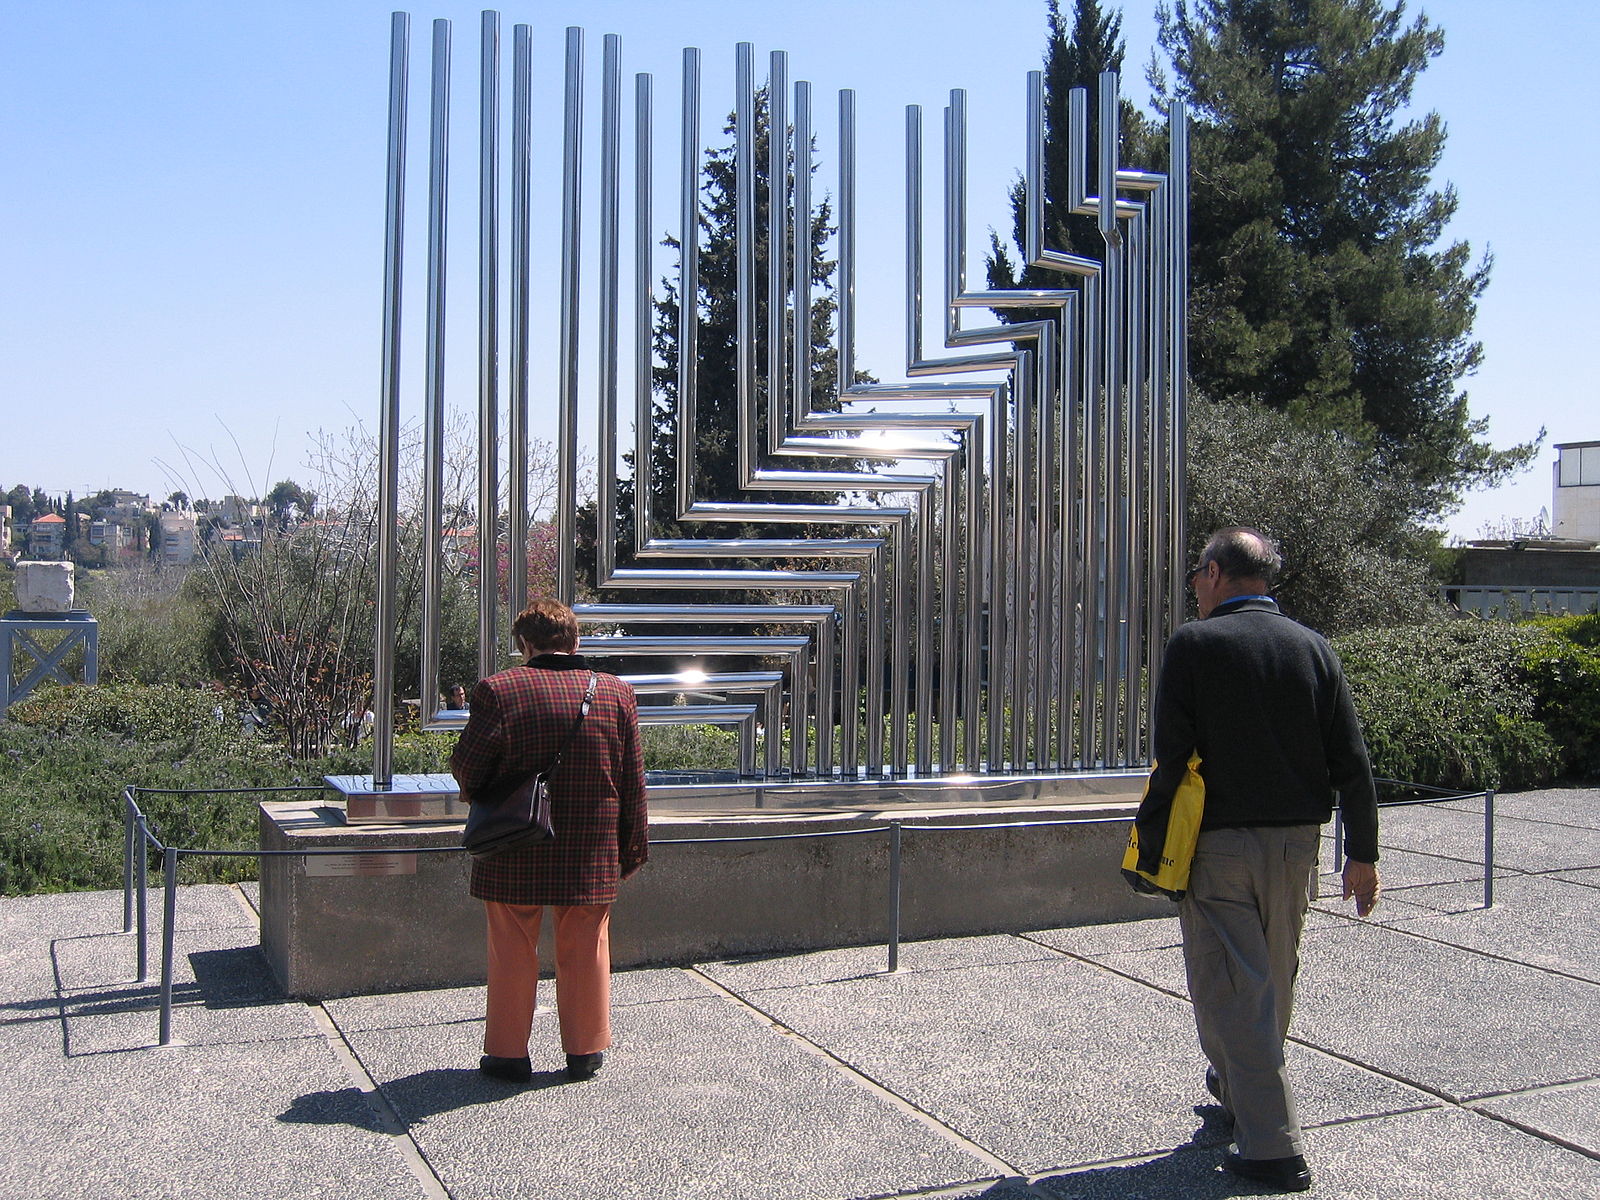 A metal tube sculpture with right angles in certain places